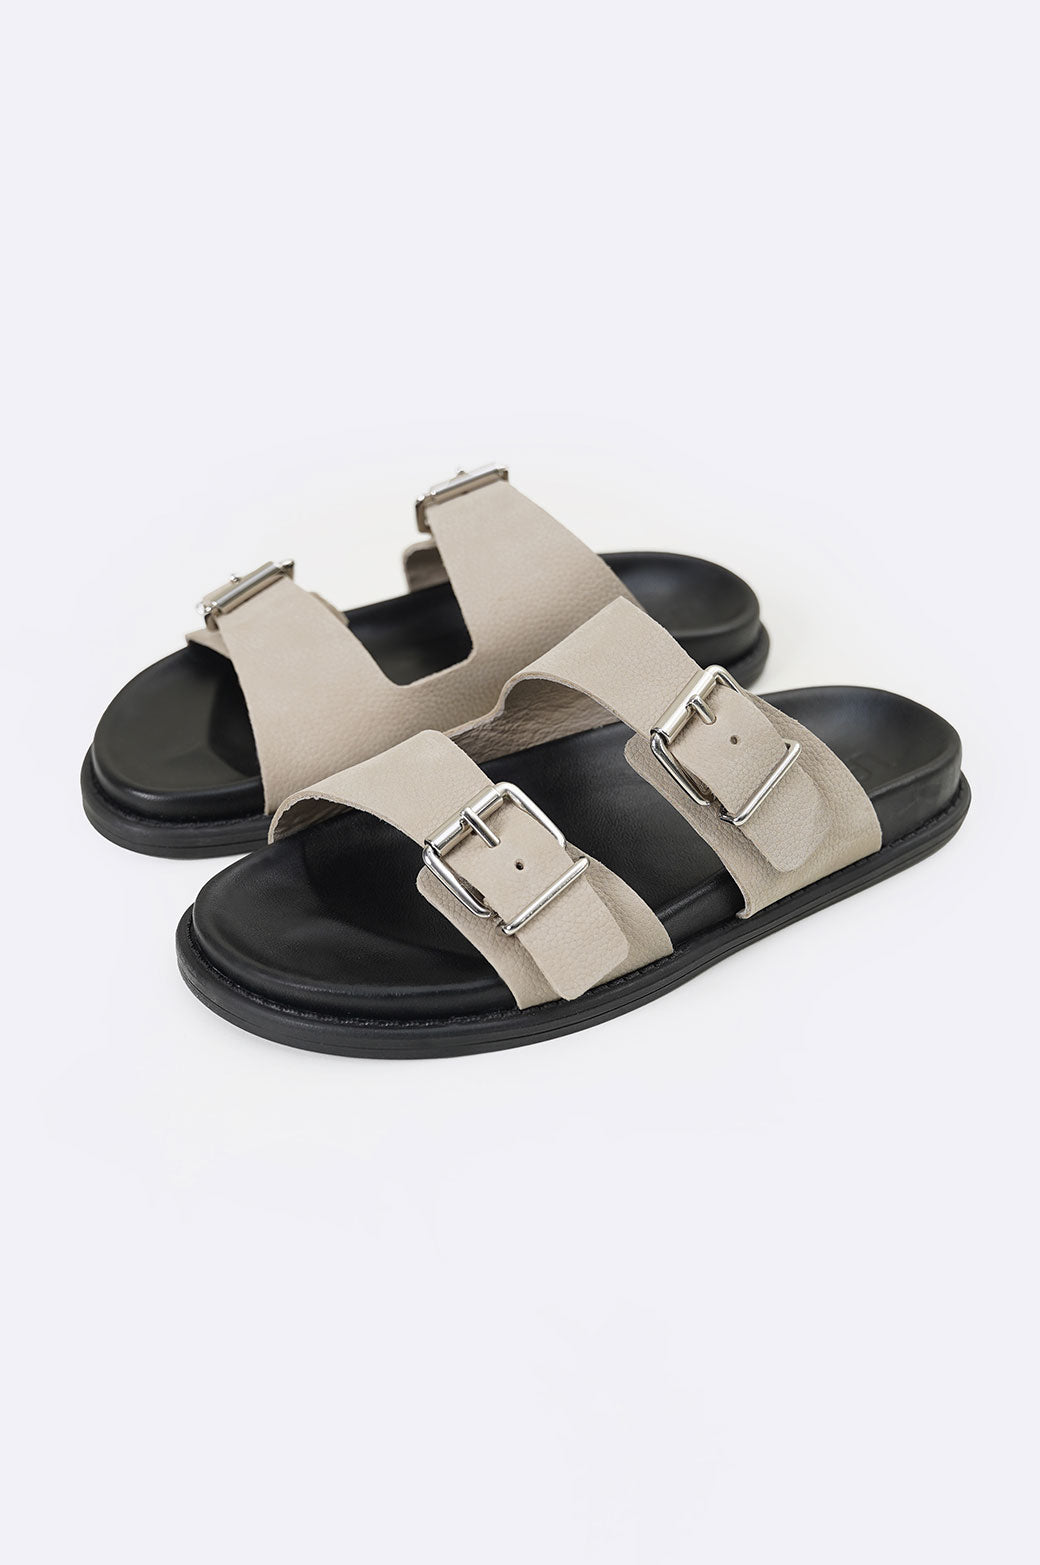 LIGHT GREY LEATHER SLIPPERS